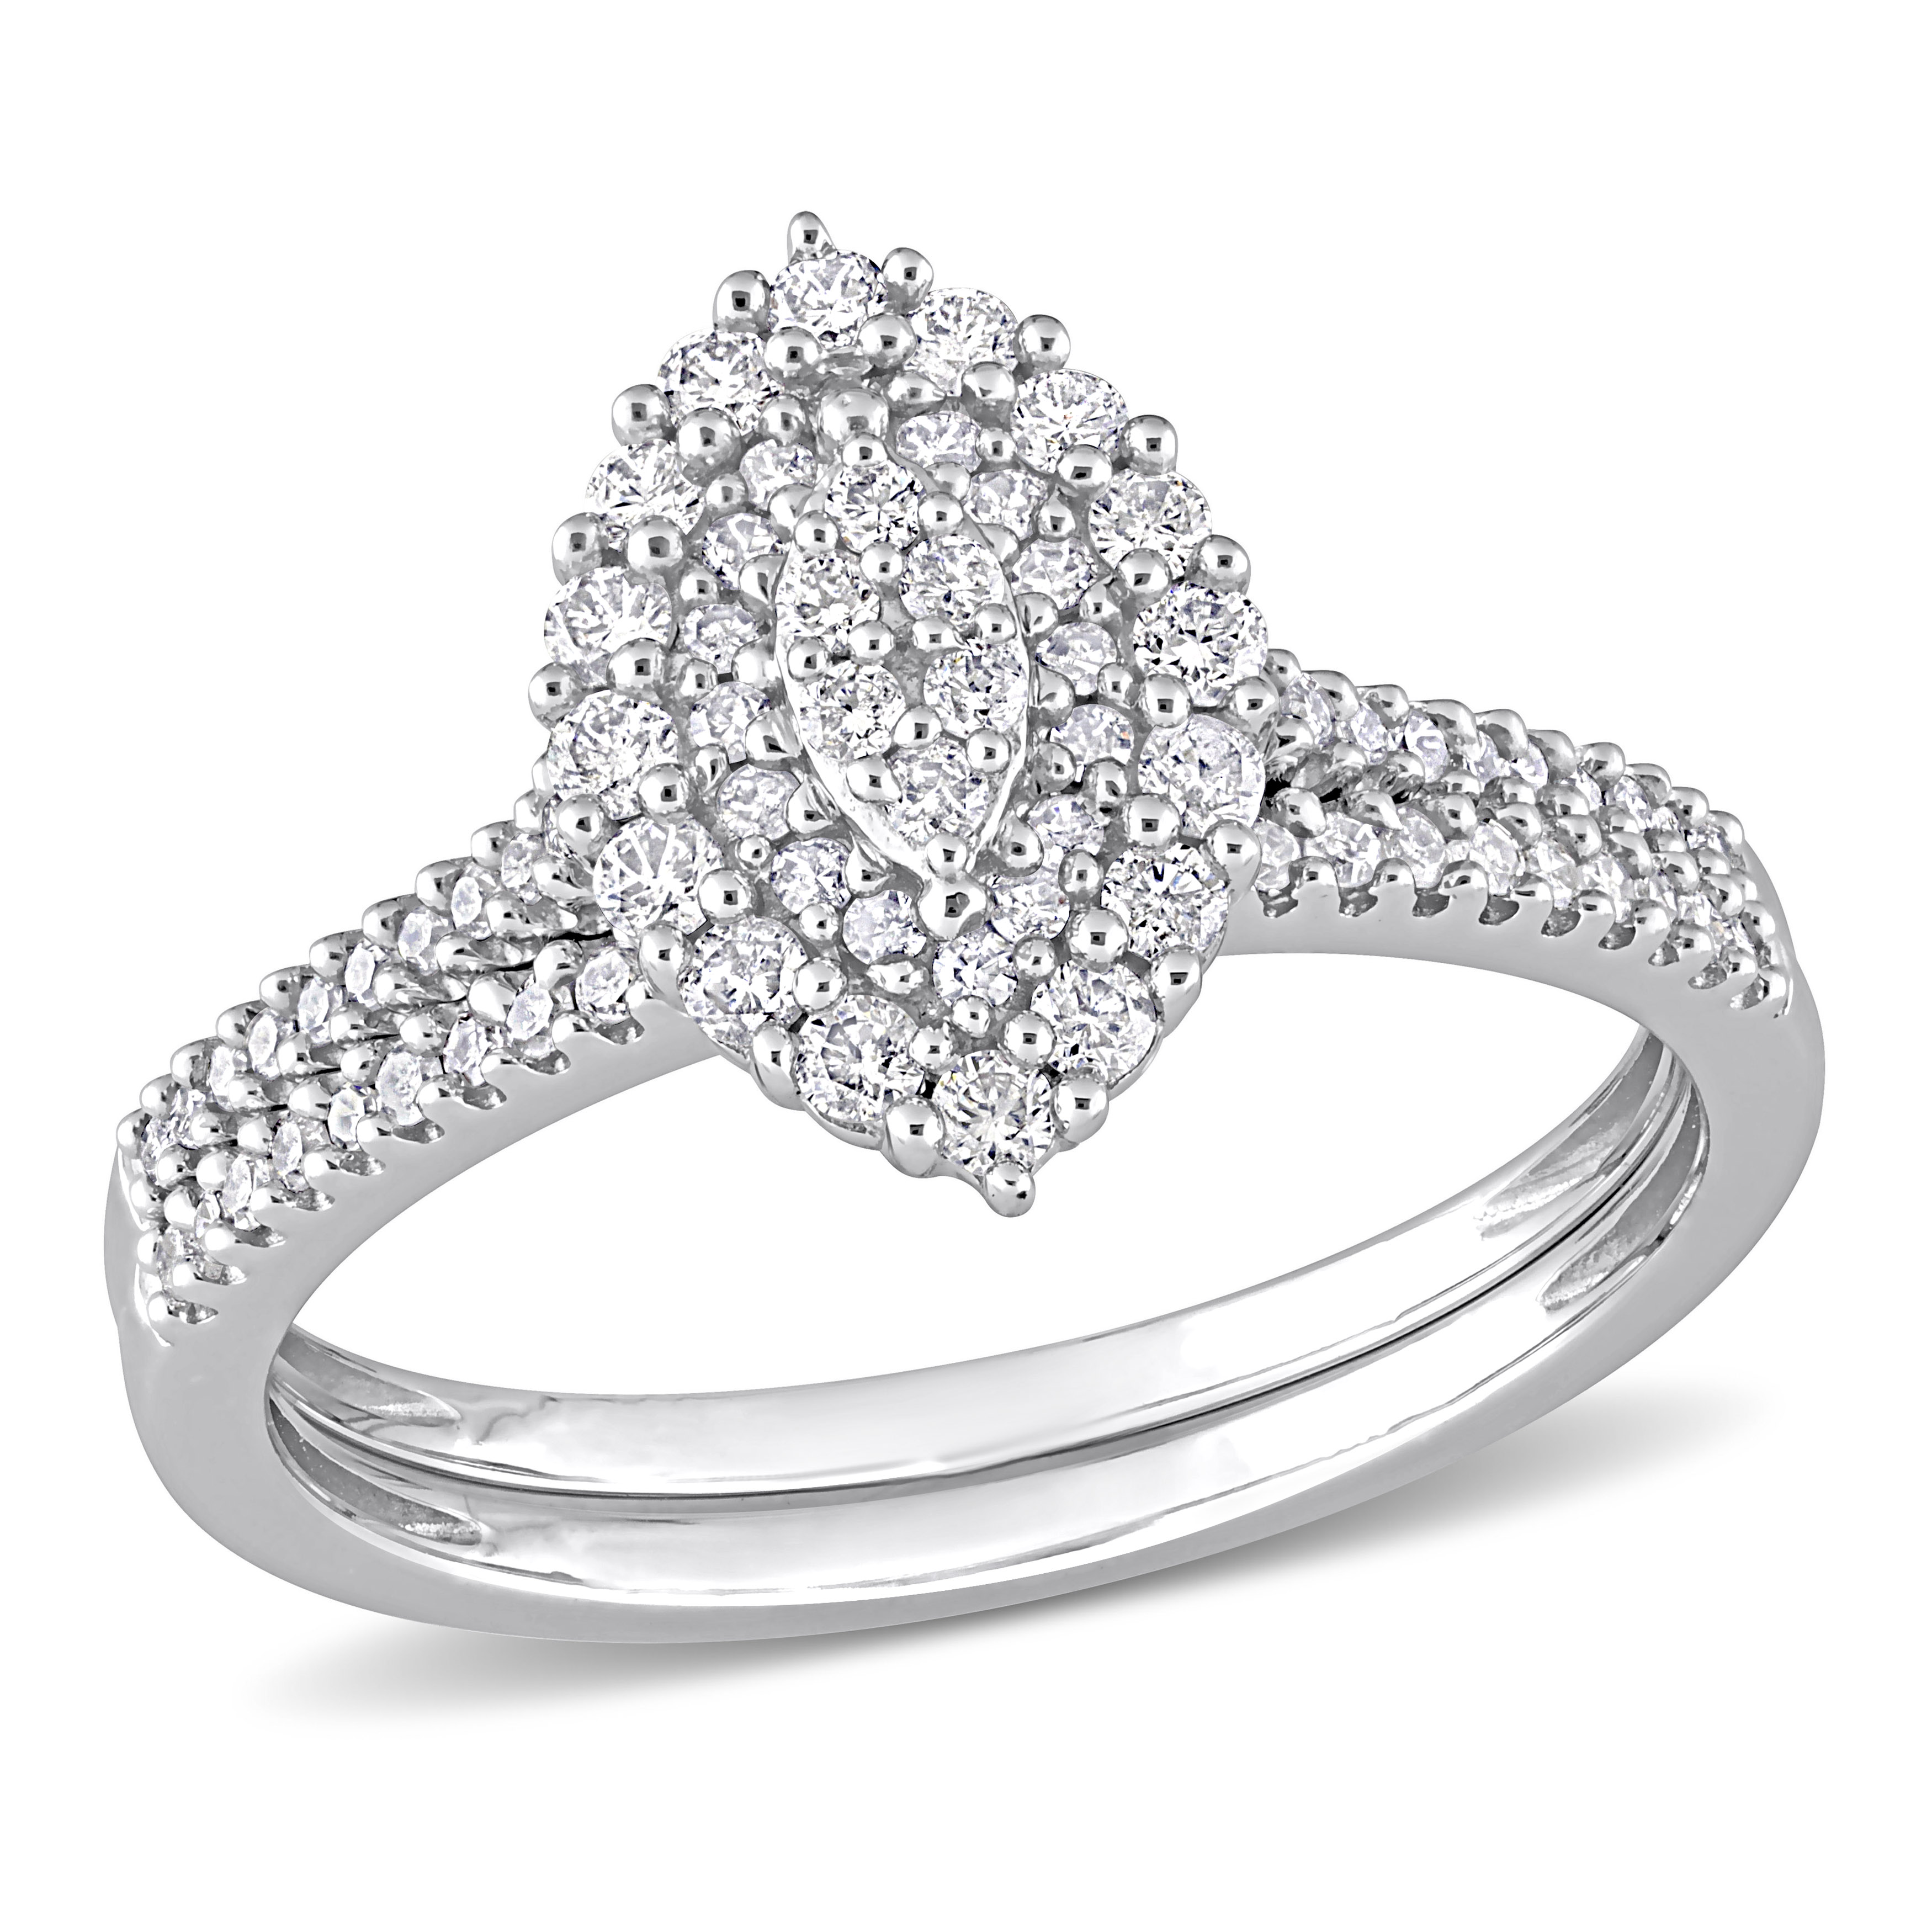 1/2 CT TW Marquise & Round Diamond Double Halo Cluster Bridal Set in 10k White Gold